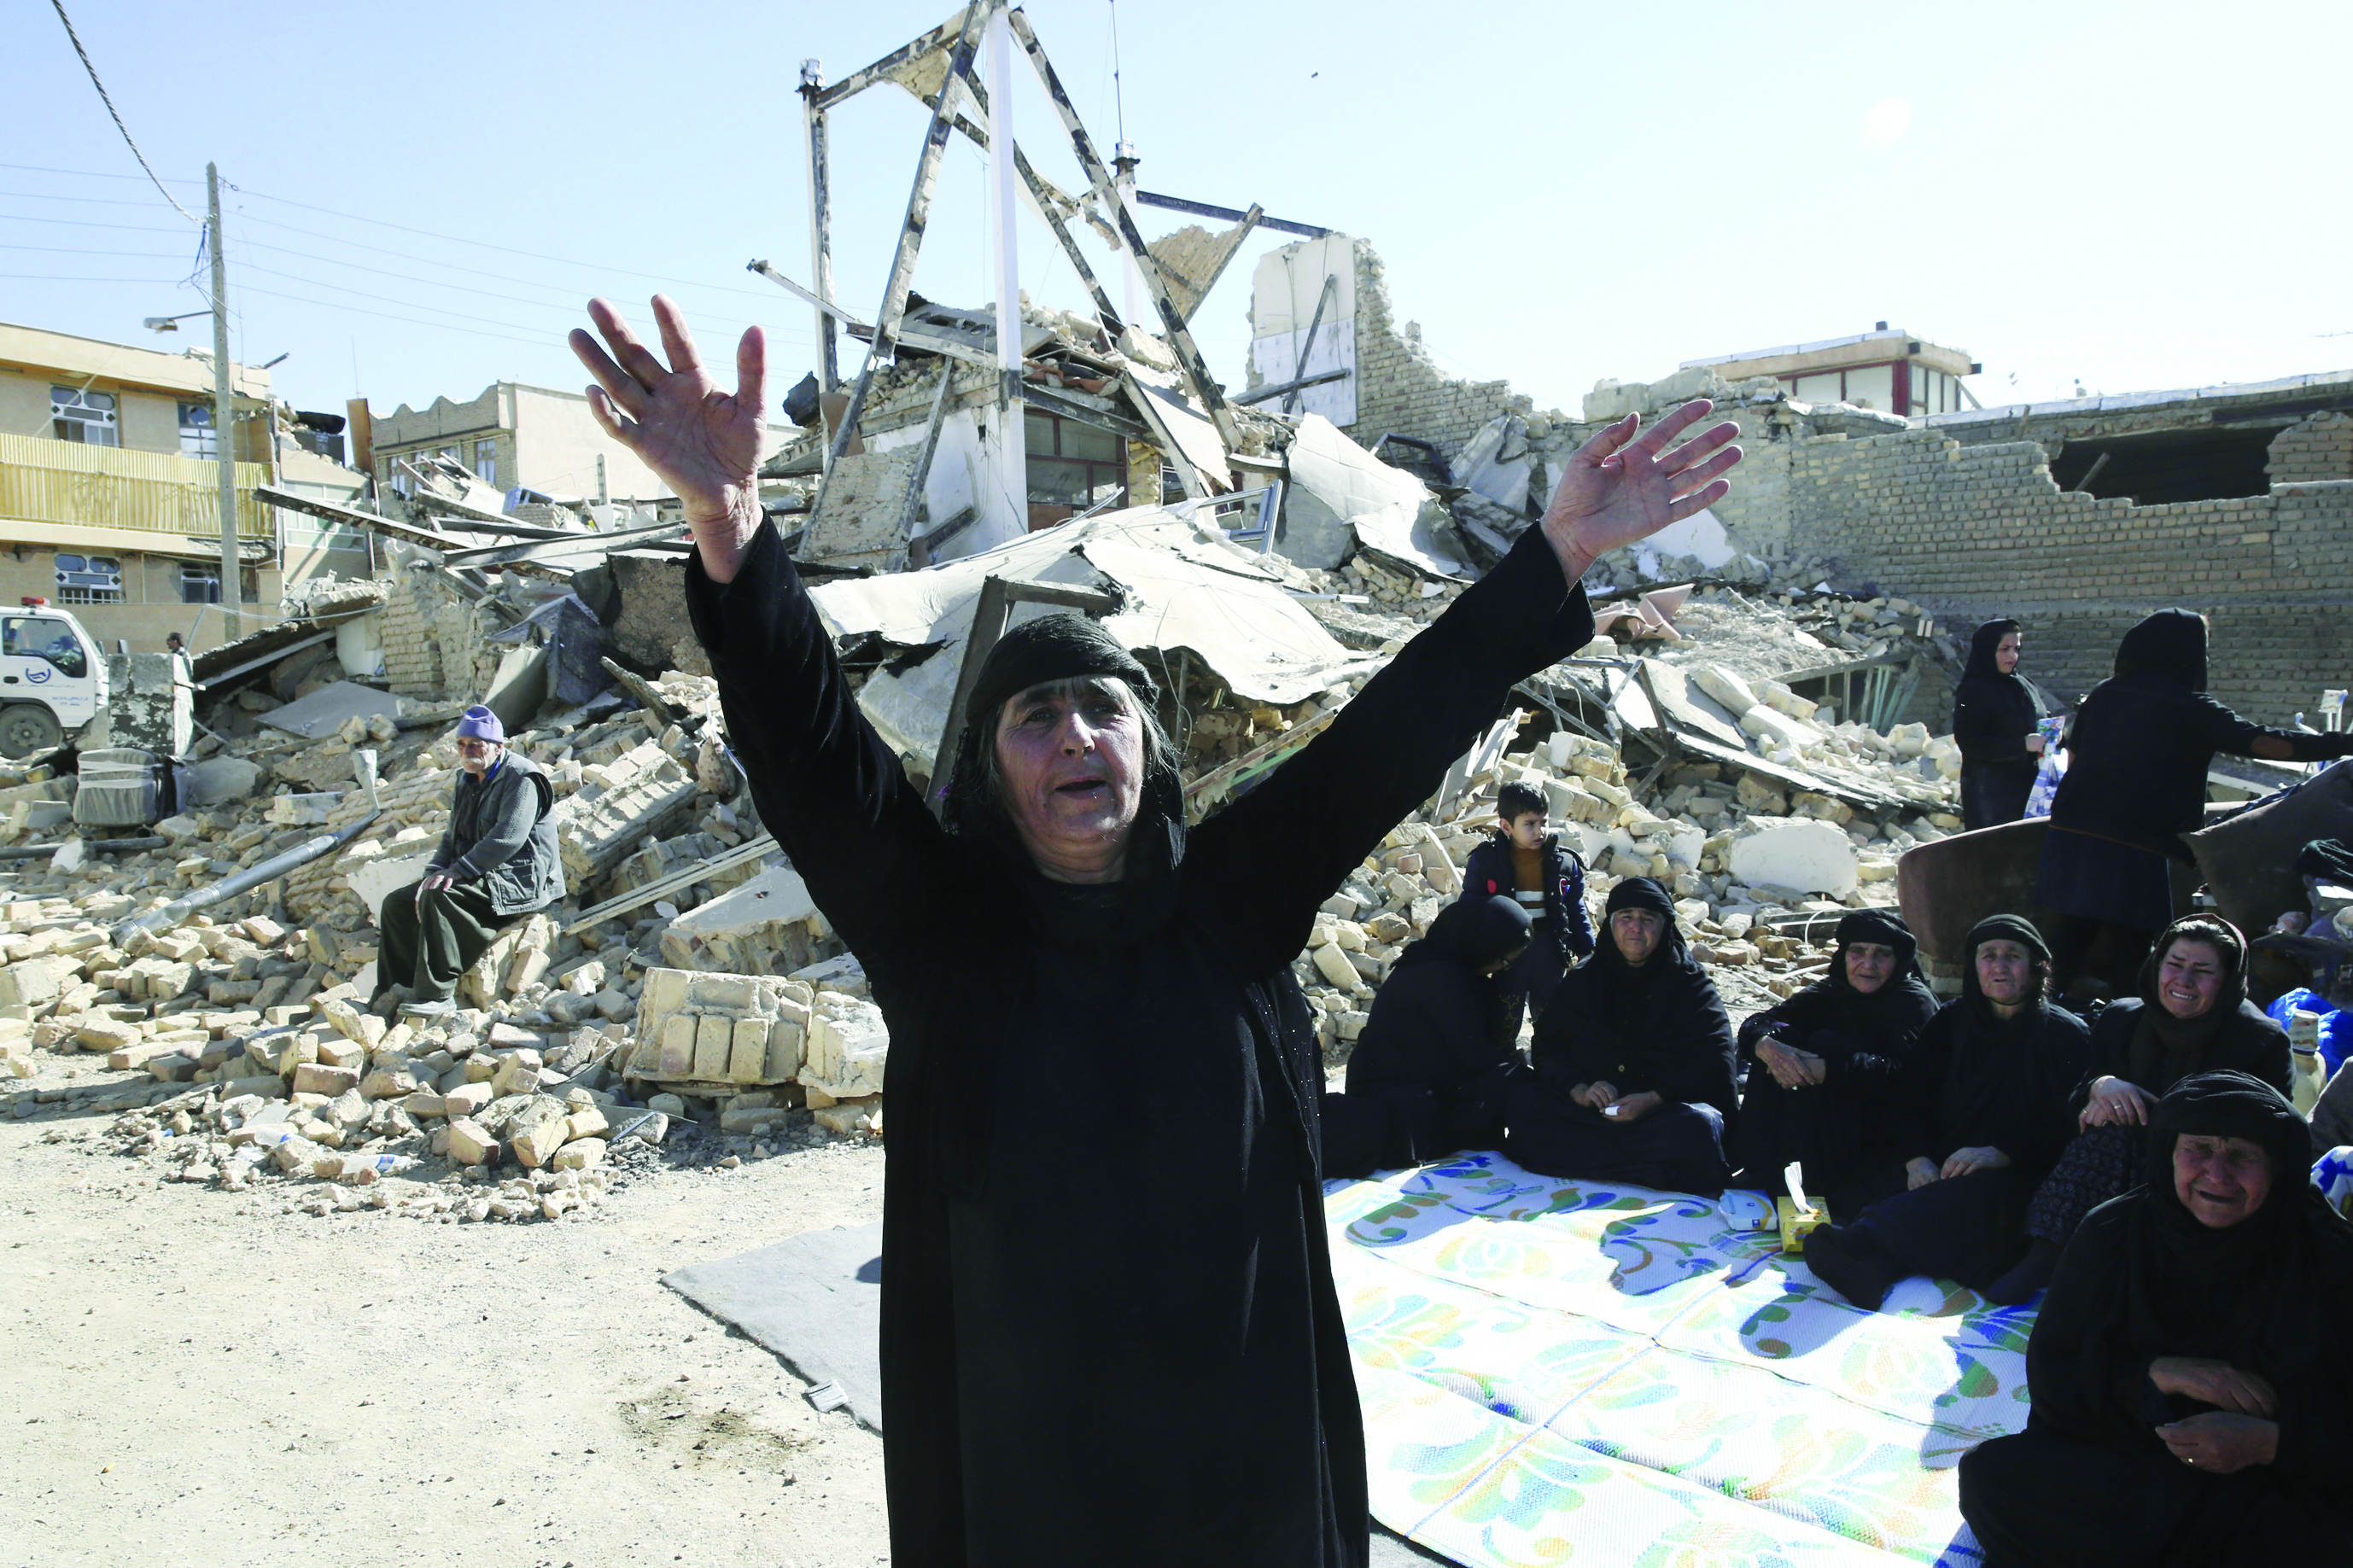 SARPOL-E-ZAHAB: A woman mourns at an earthquake site in Sarpol-e-Zahab in western Iran, yesterday. Rescuers are digging through the debris of buildings felled by the Sunday earthquake in the border region of Iran and Iraq. - AP 